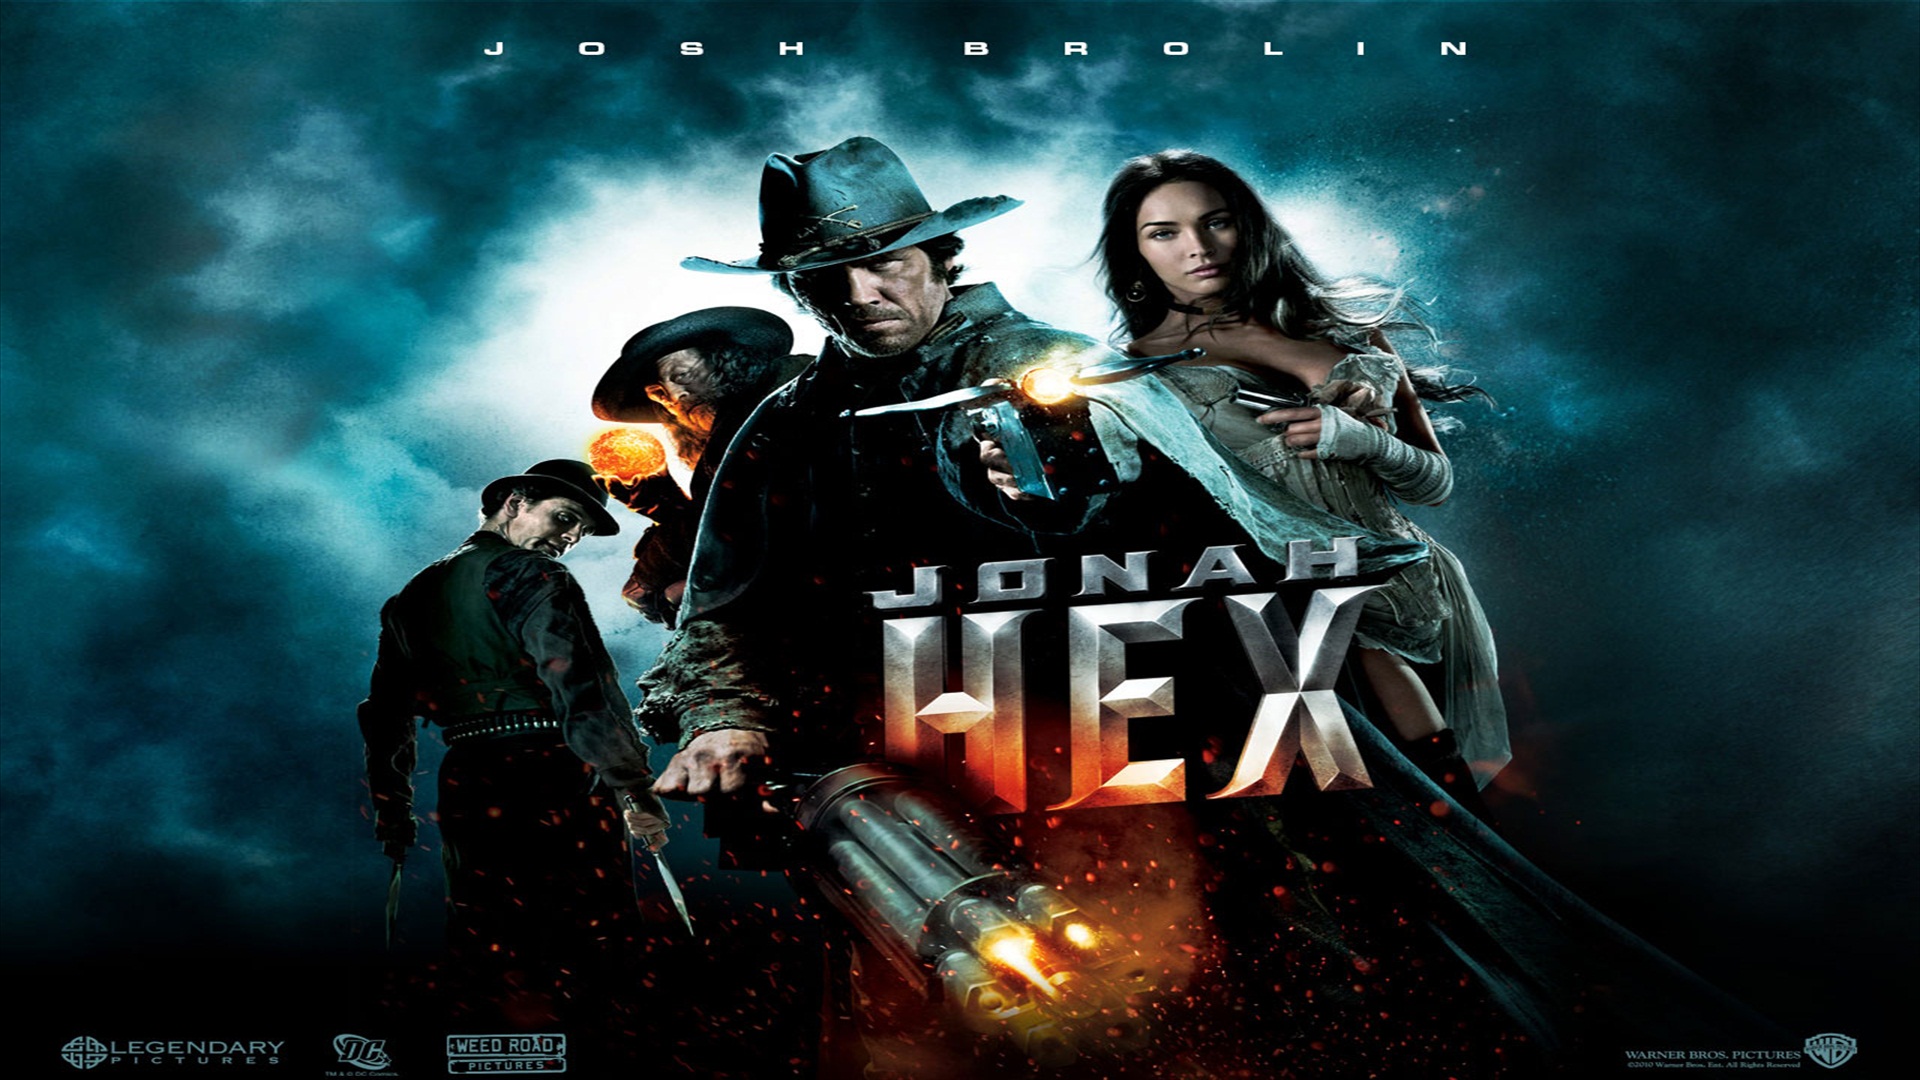 jonah hex, movie cell phone wallpapers